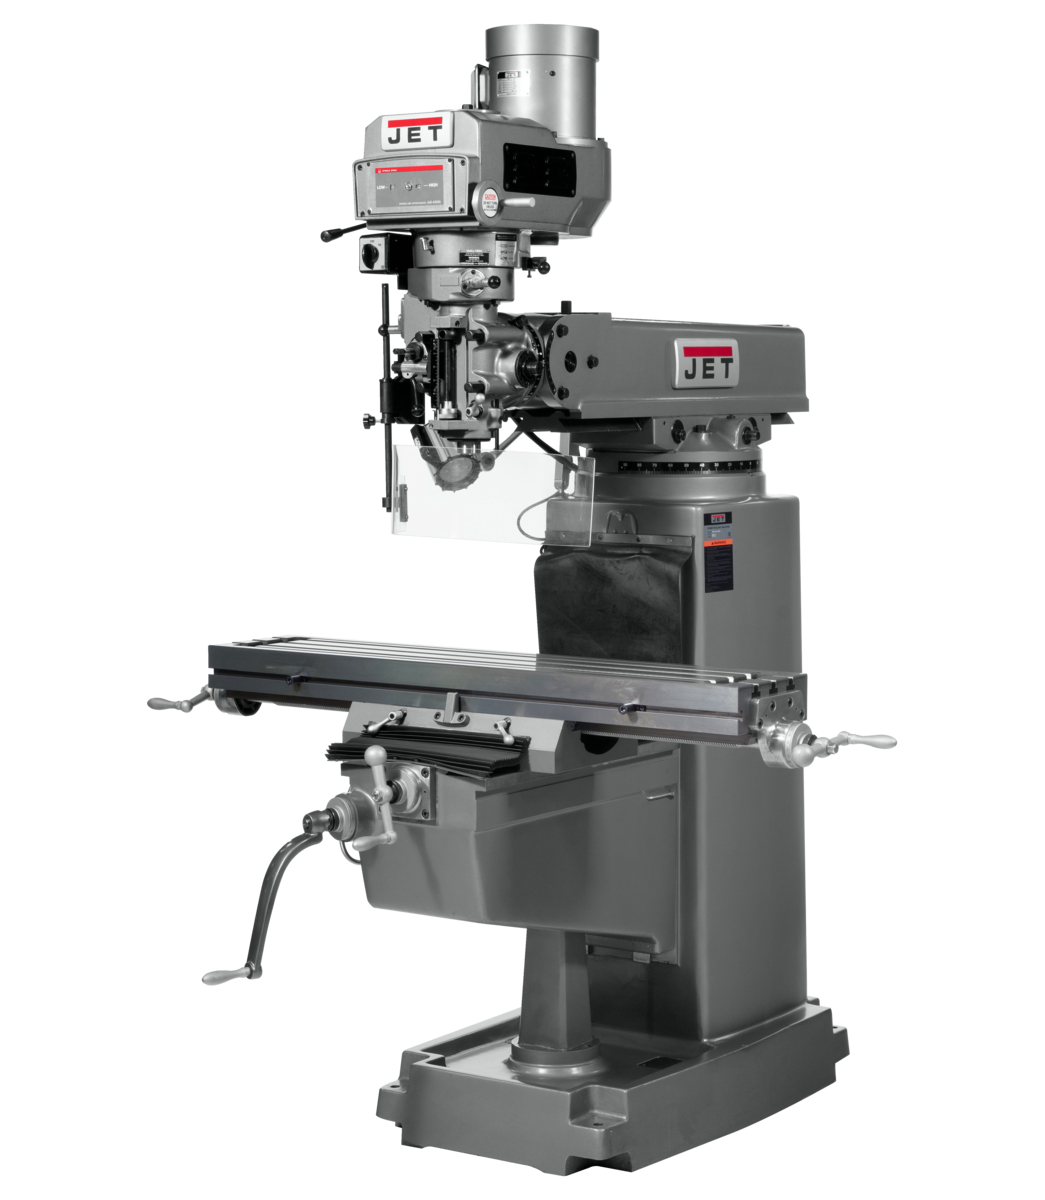 690234, The Jet JTM-1050 Mill With 3-Axis Newall DP700 DRO (Quill) With X, Y and Z-Axis Powerfeeds And Power Draw Bar in Metalworking, Milling, Vertical Mills